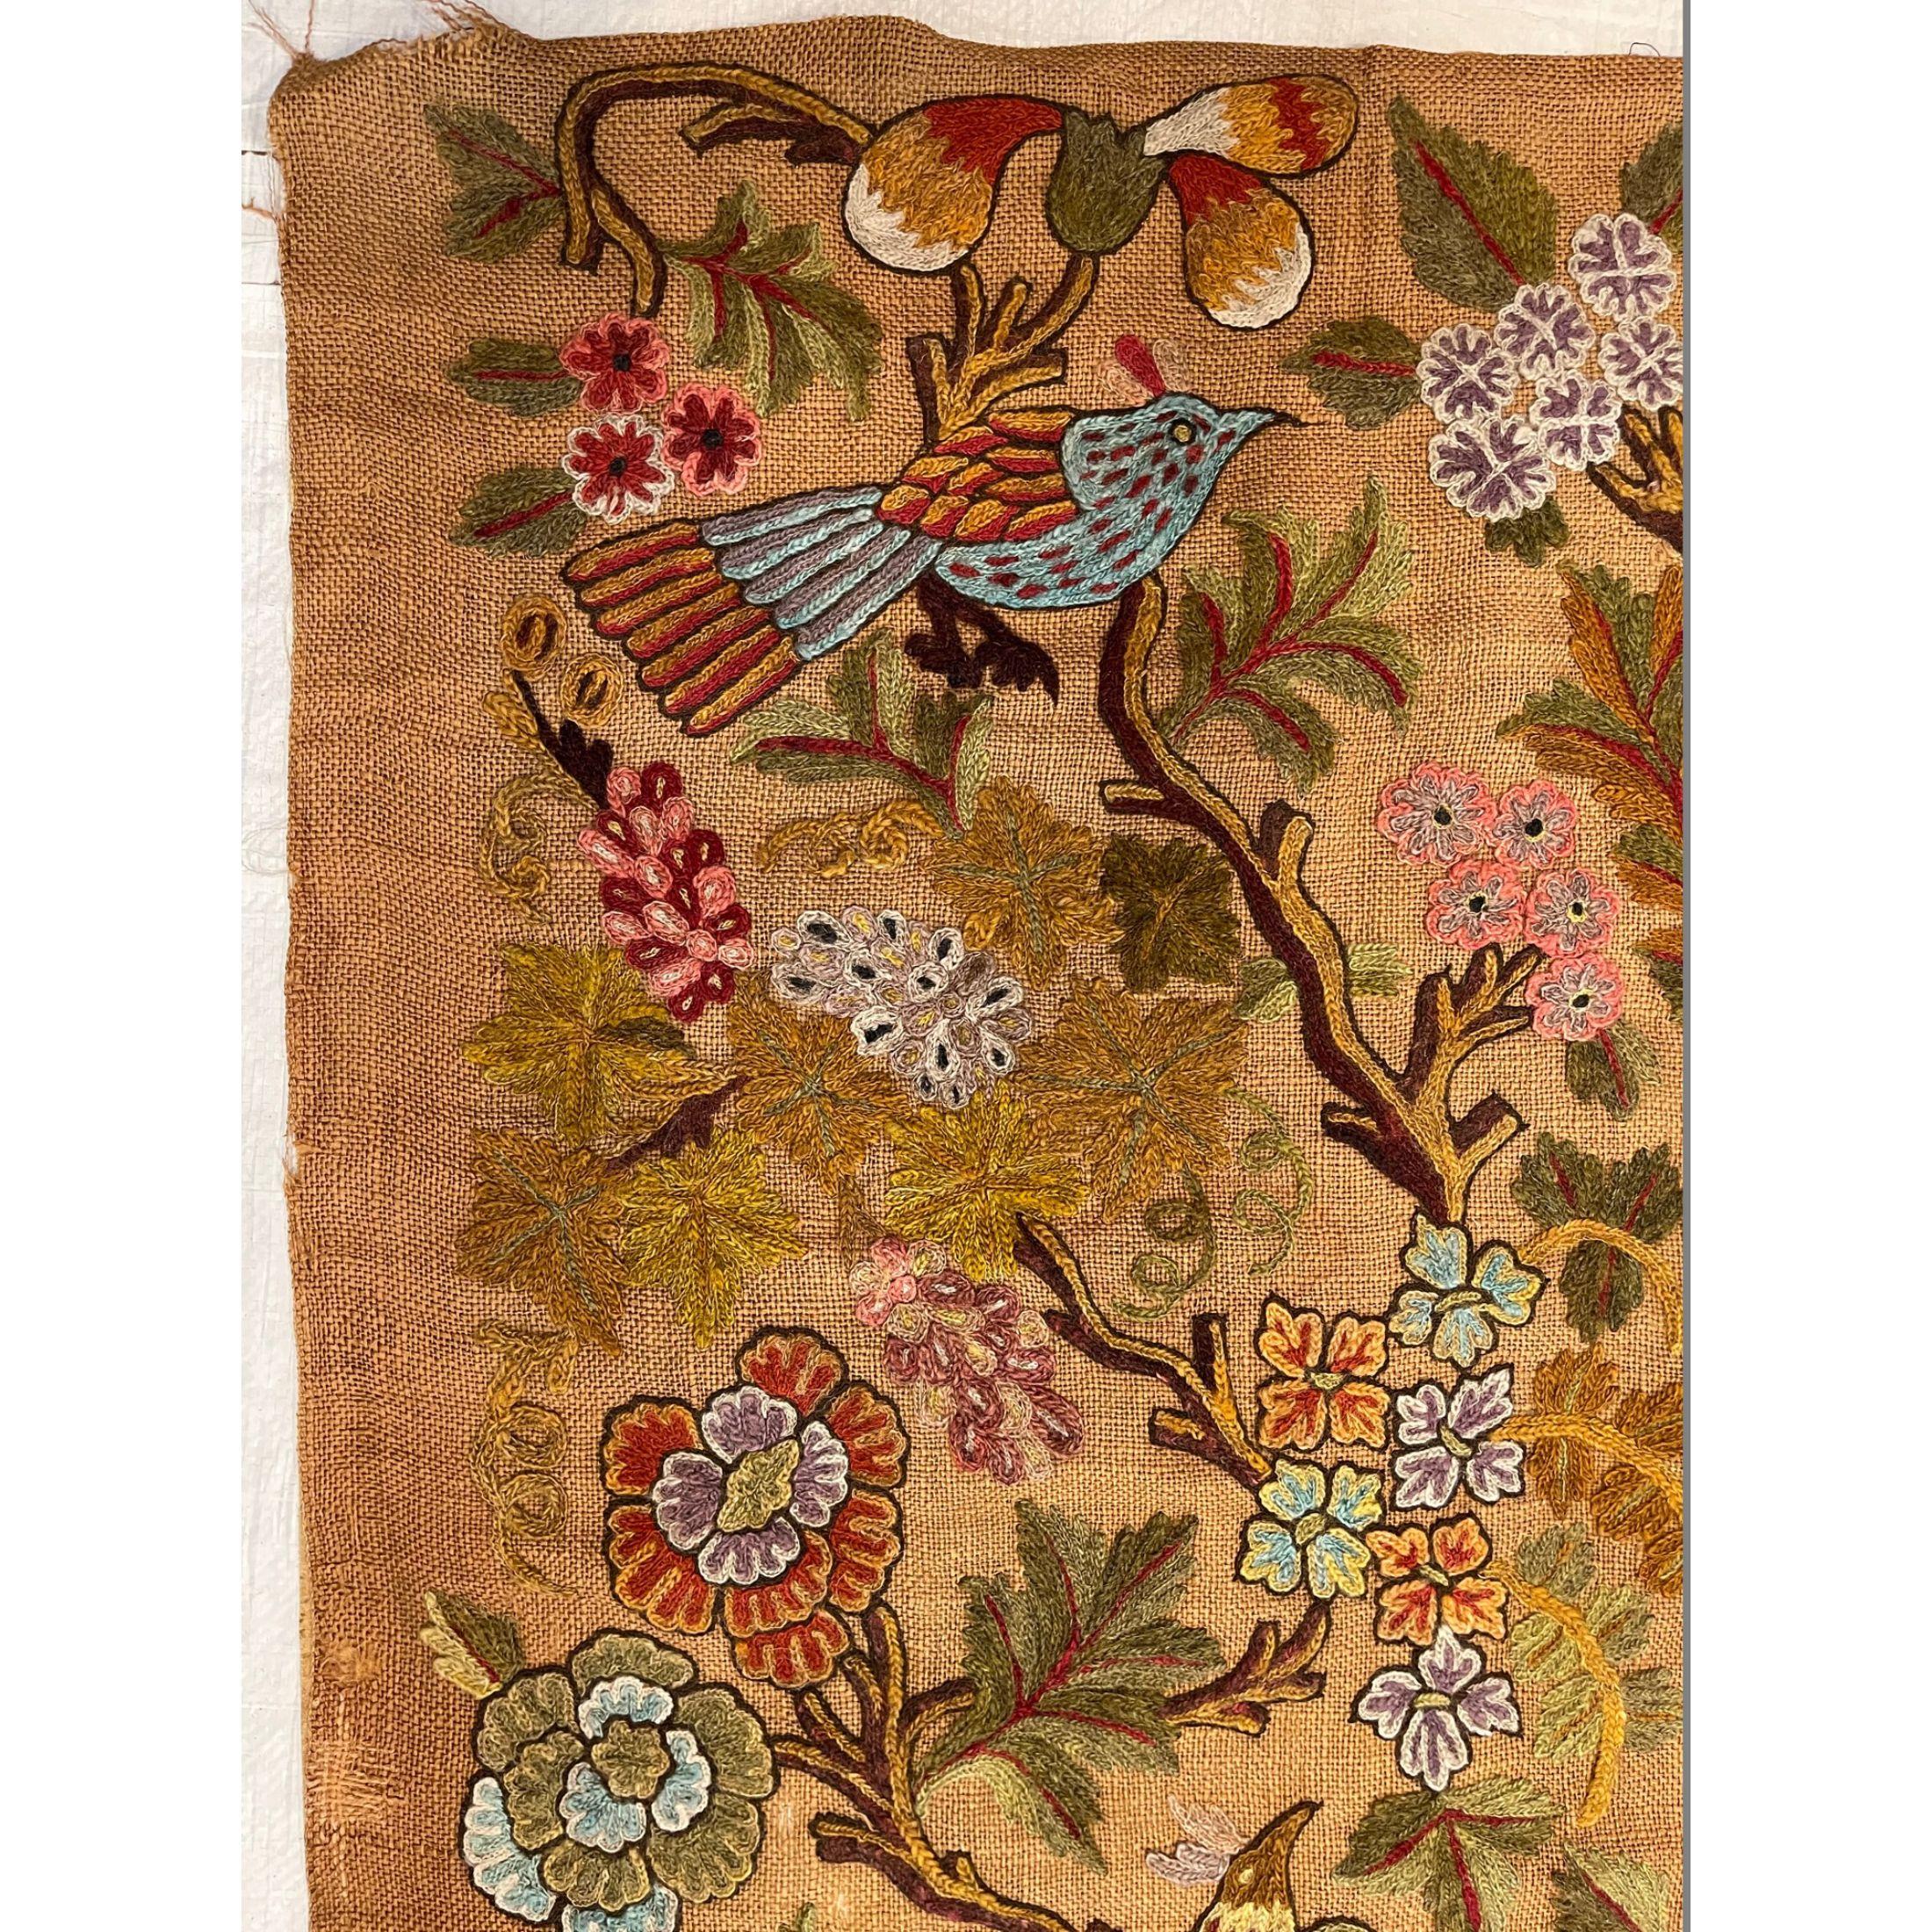 Other Antique Animal Print Style Crewelwork